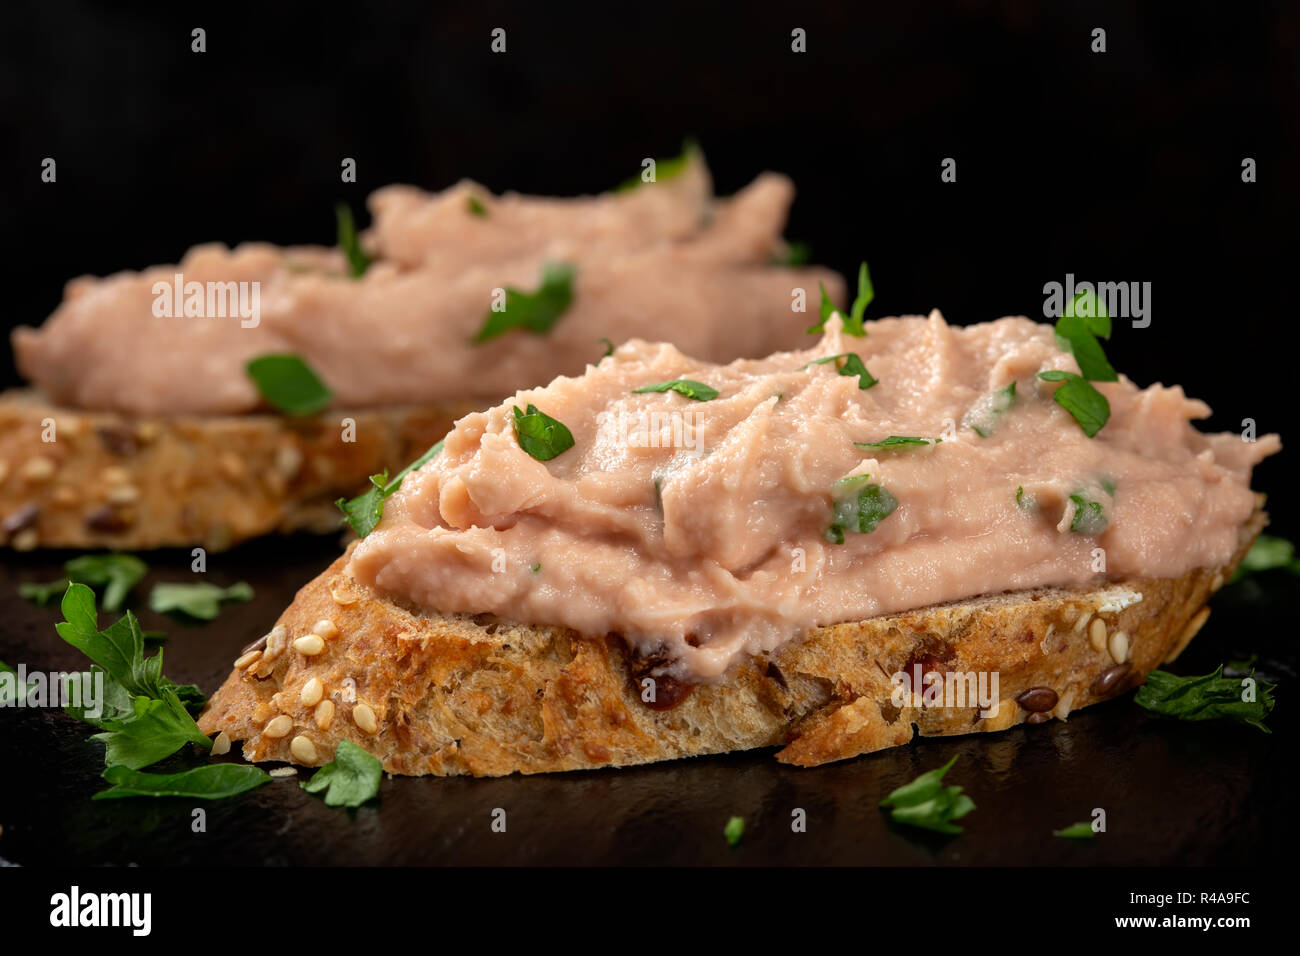 Two slices of bread with vegetable pate and chopped green parsley on a dark slate Stock Photo